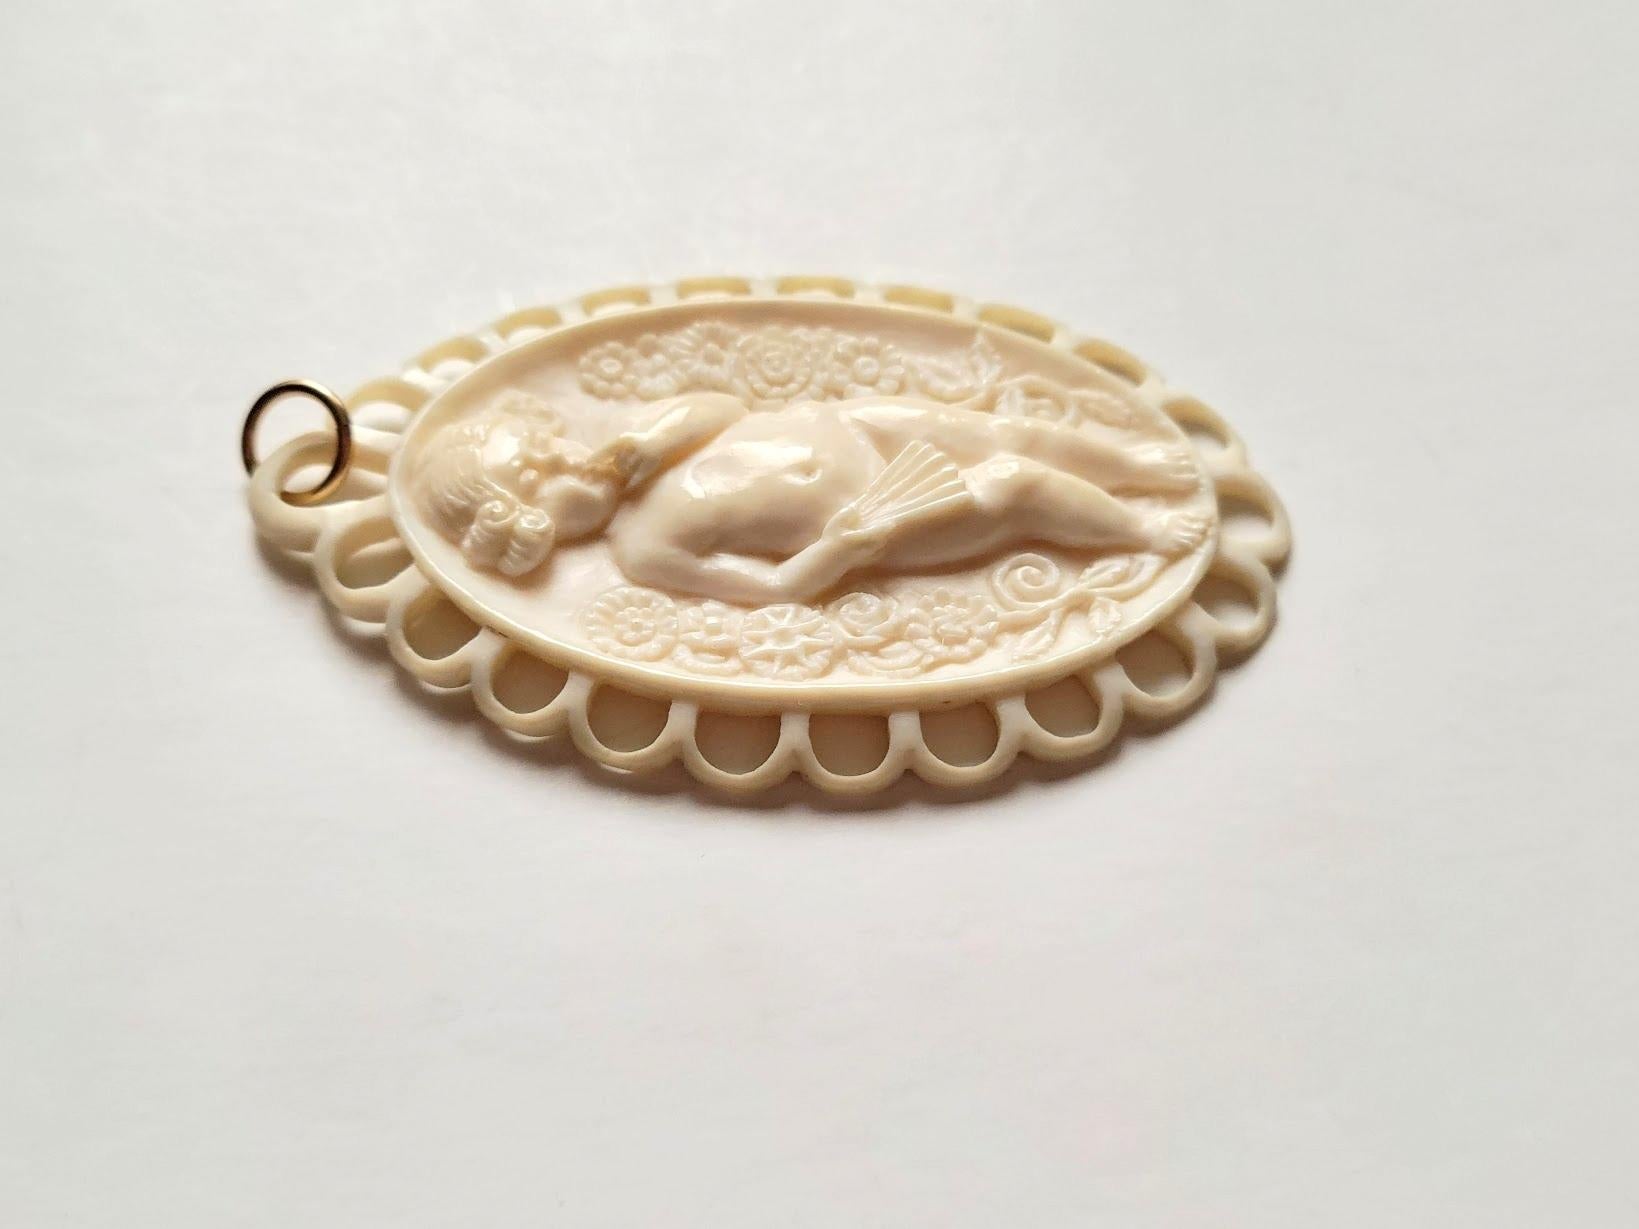 Antique Dieppe Carved Ivory Cameo Pendant In Excellent Condition For Sale In Chesterland, OH